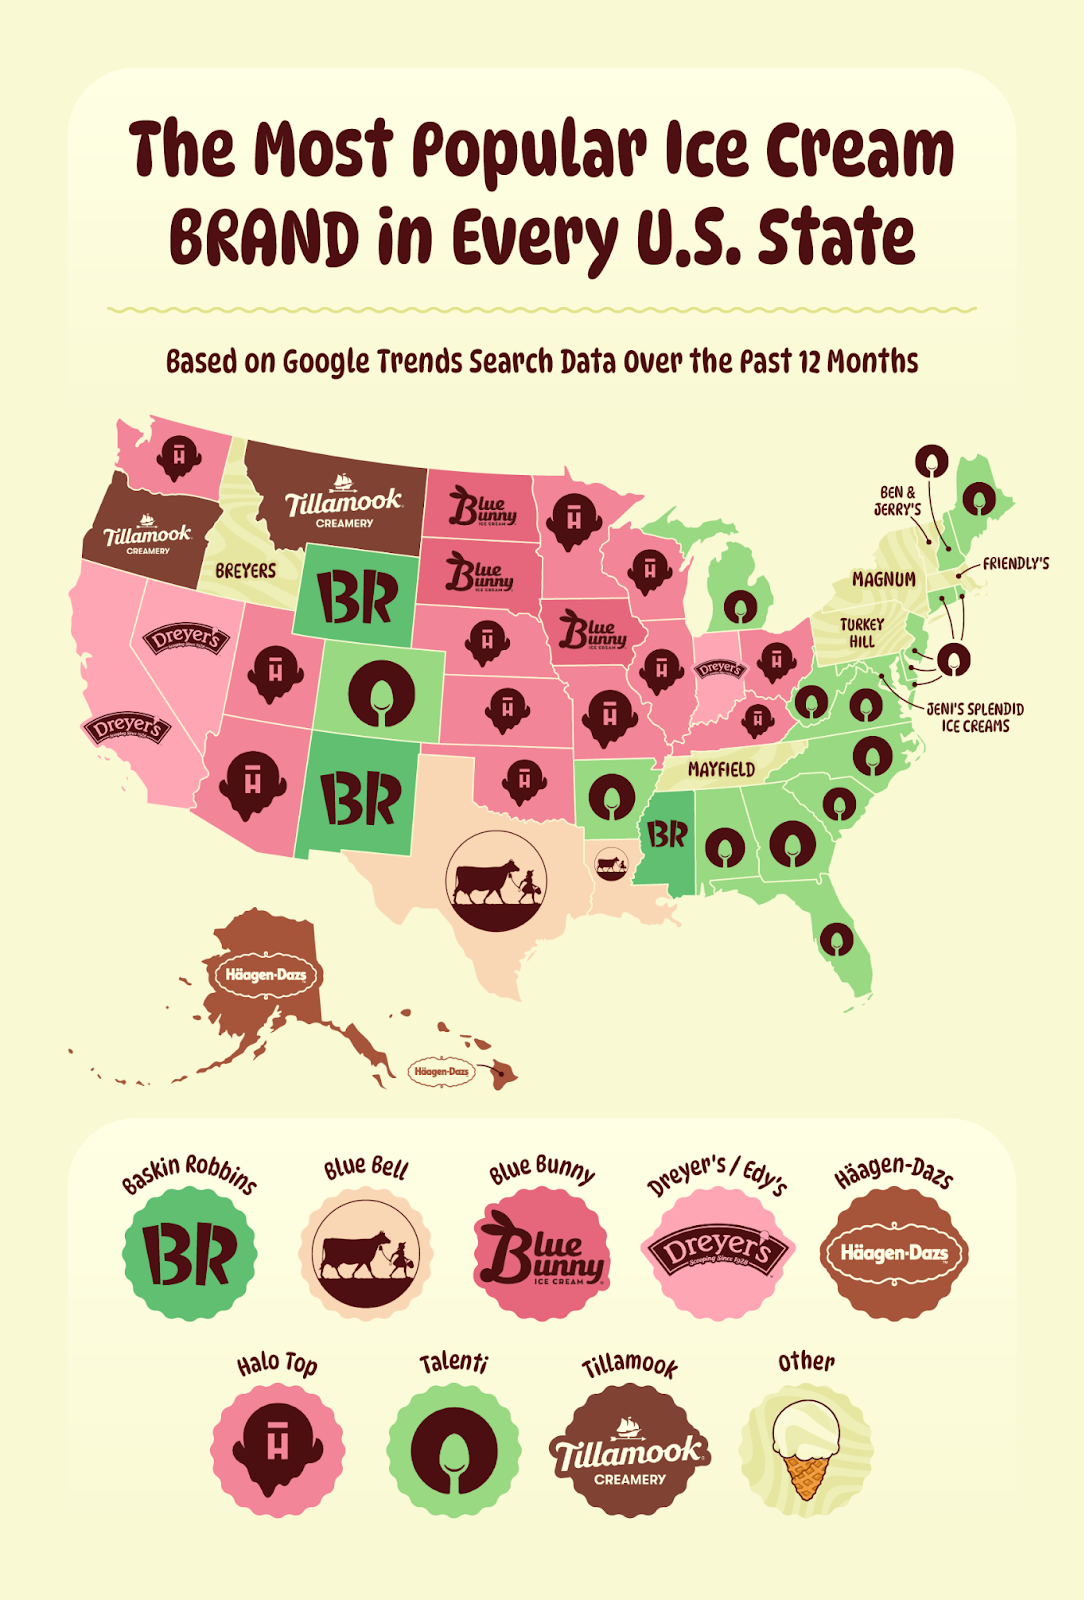 A map of the most popular ice cream brand in each state.